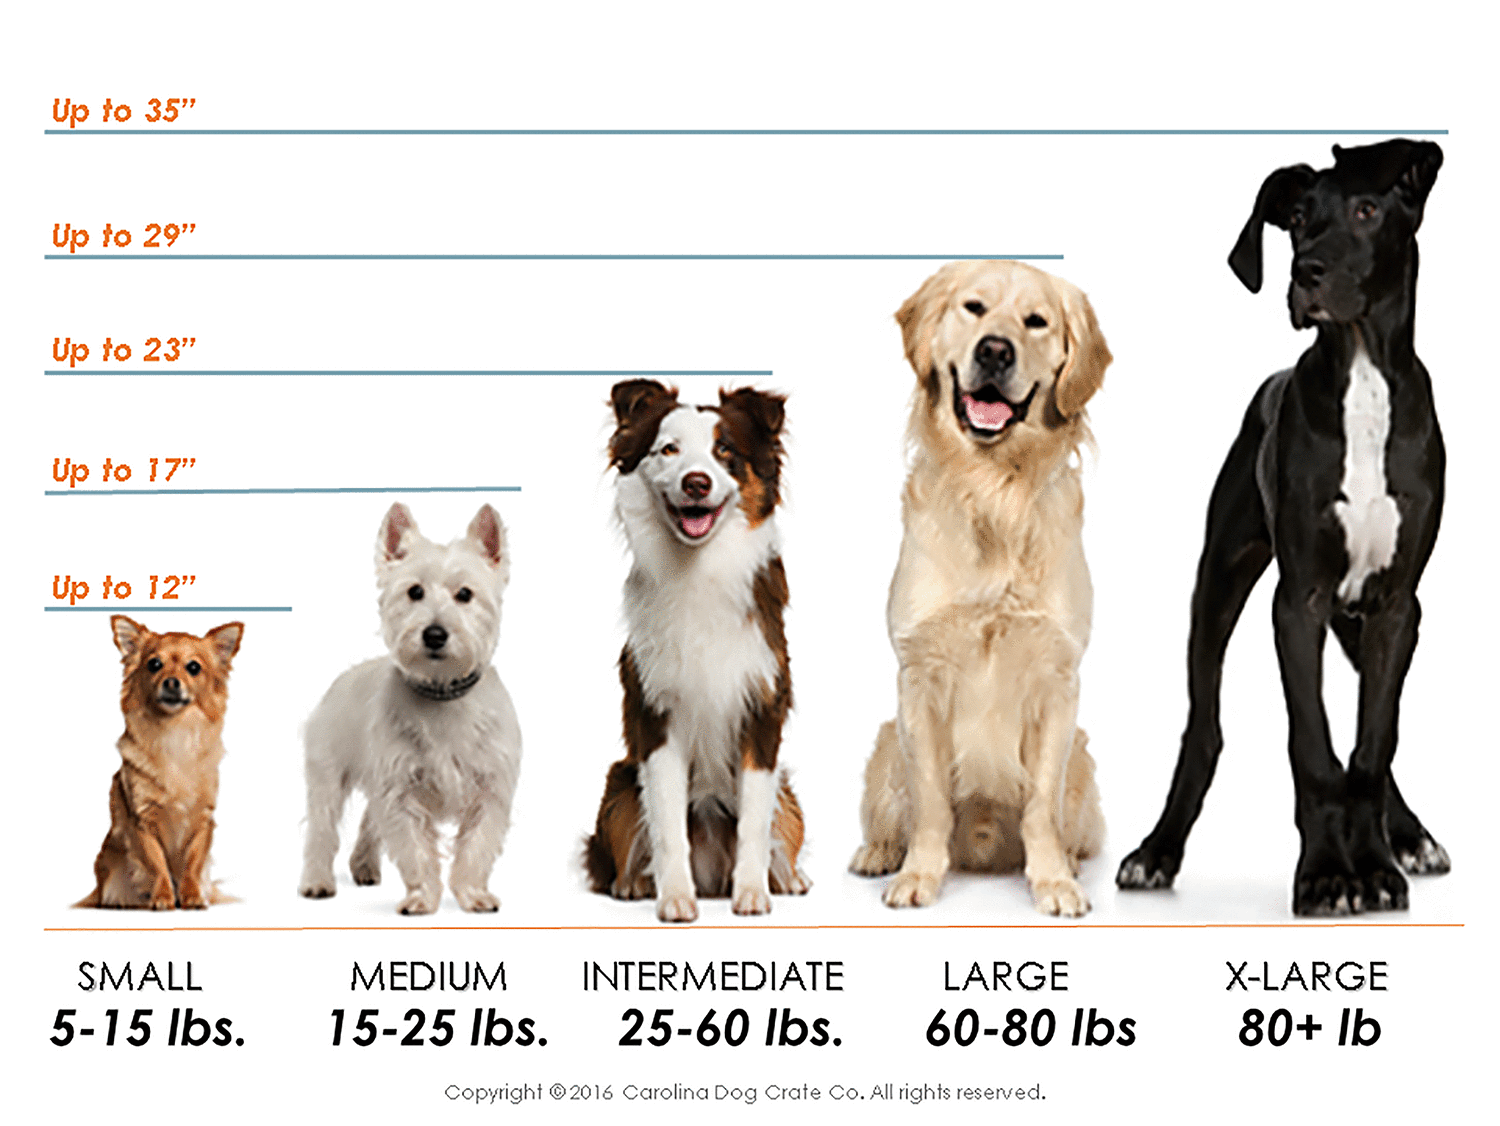 dog kennel size guide